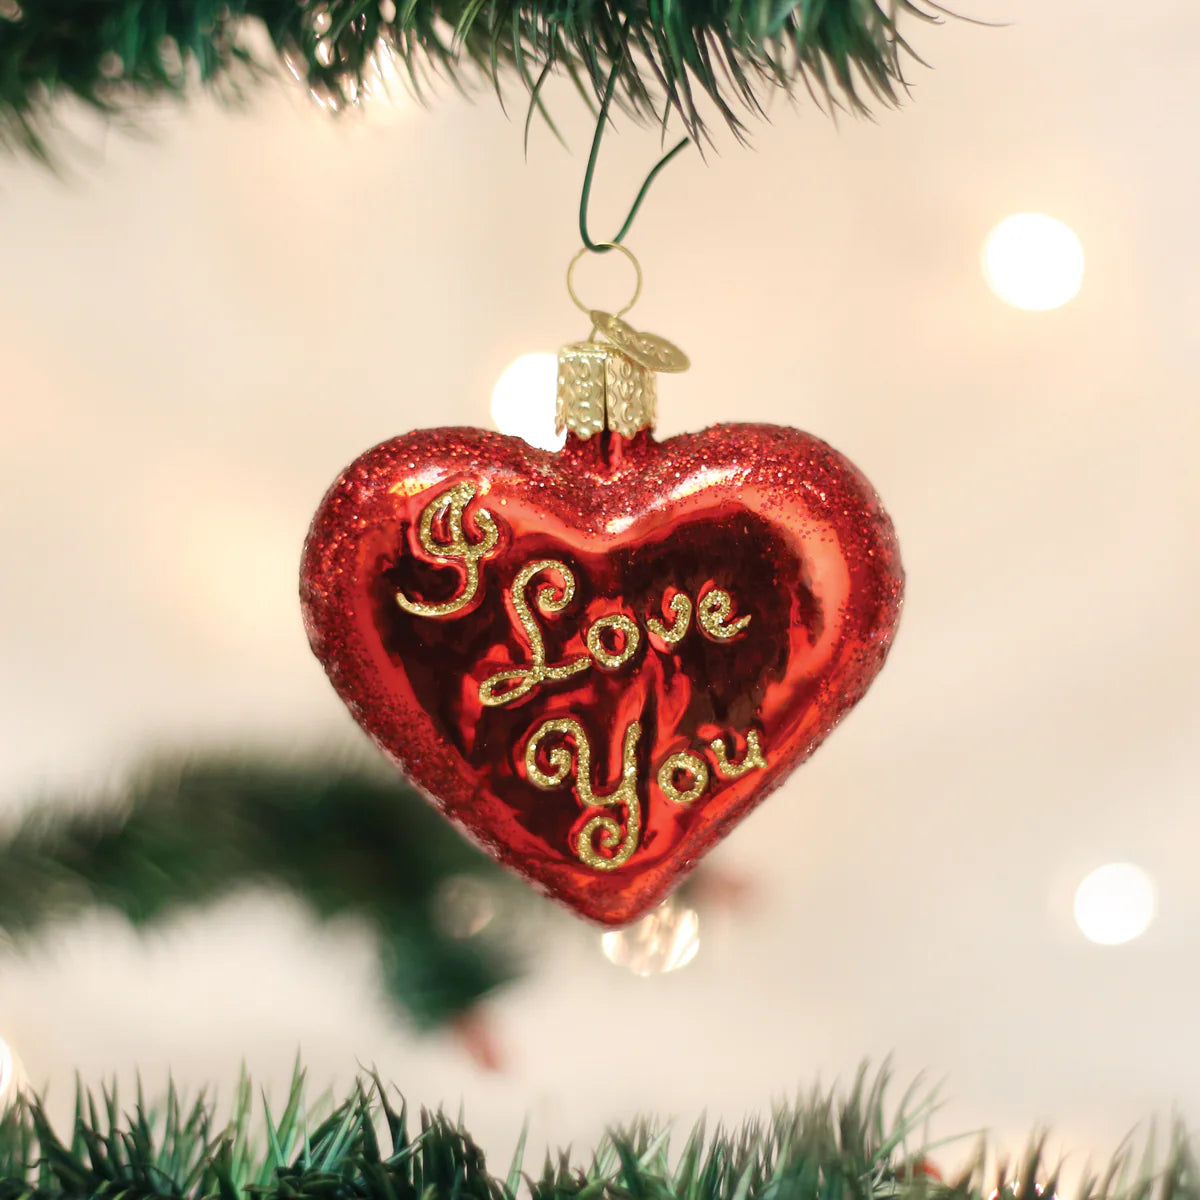 Old World Christmas - I Love You Heart Ornament